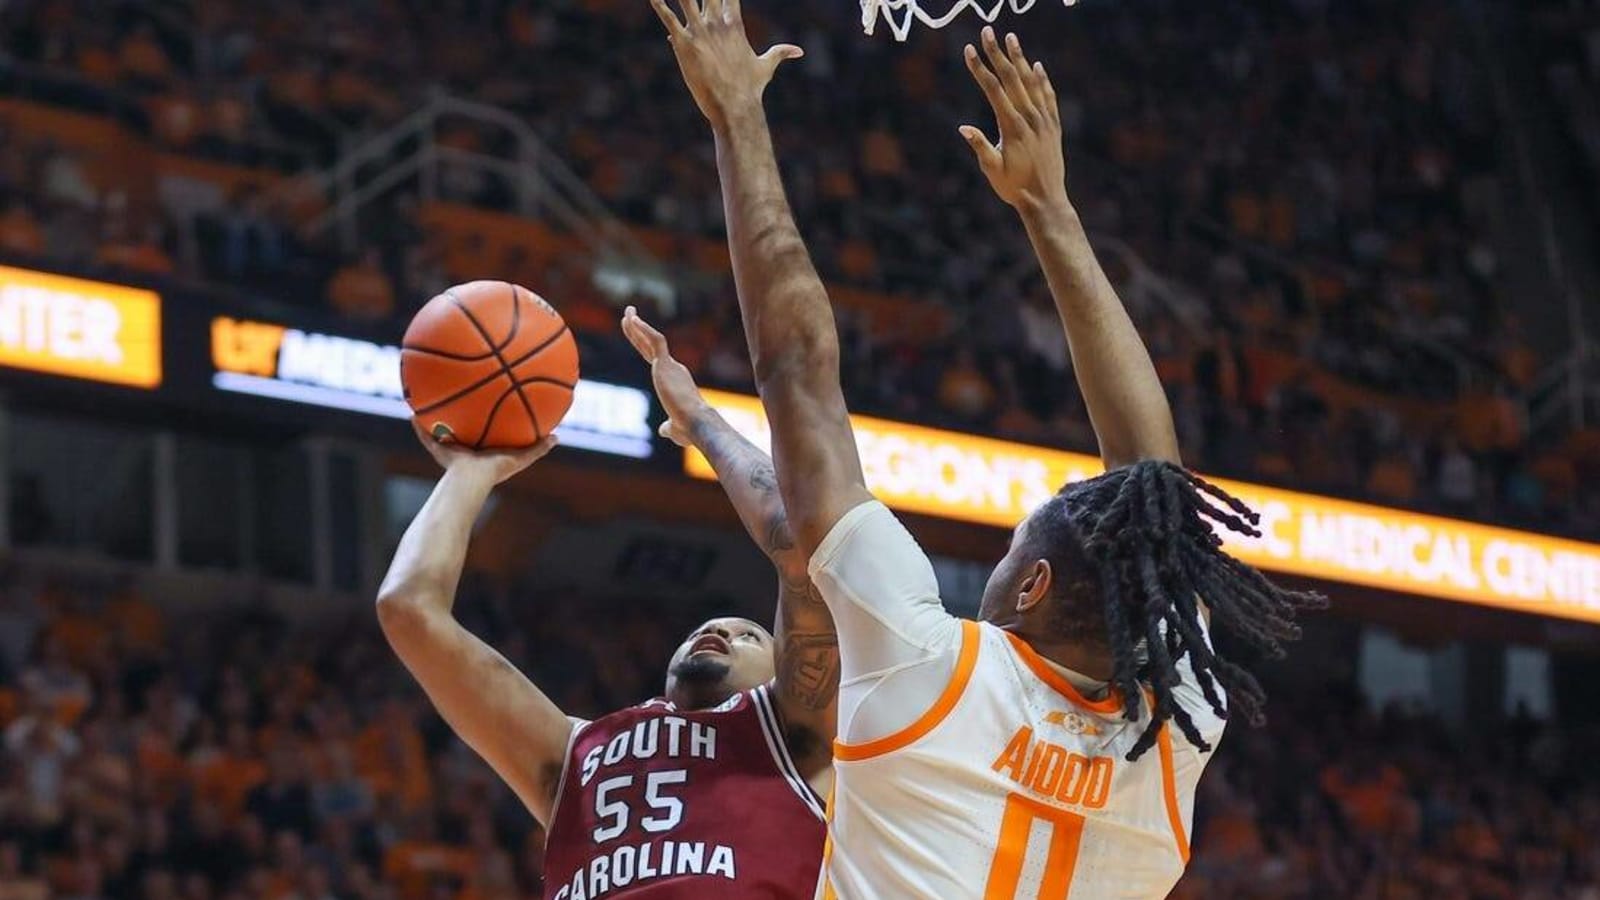 Share of SEC title on line for No. 4 Vols at No. 17 South Carolina